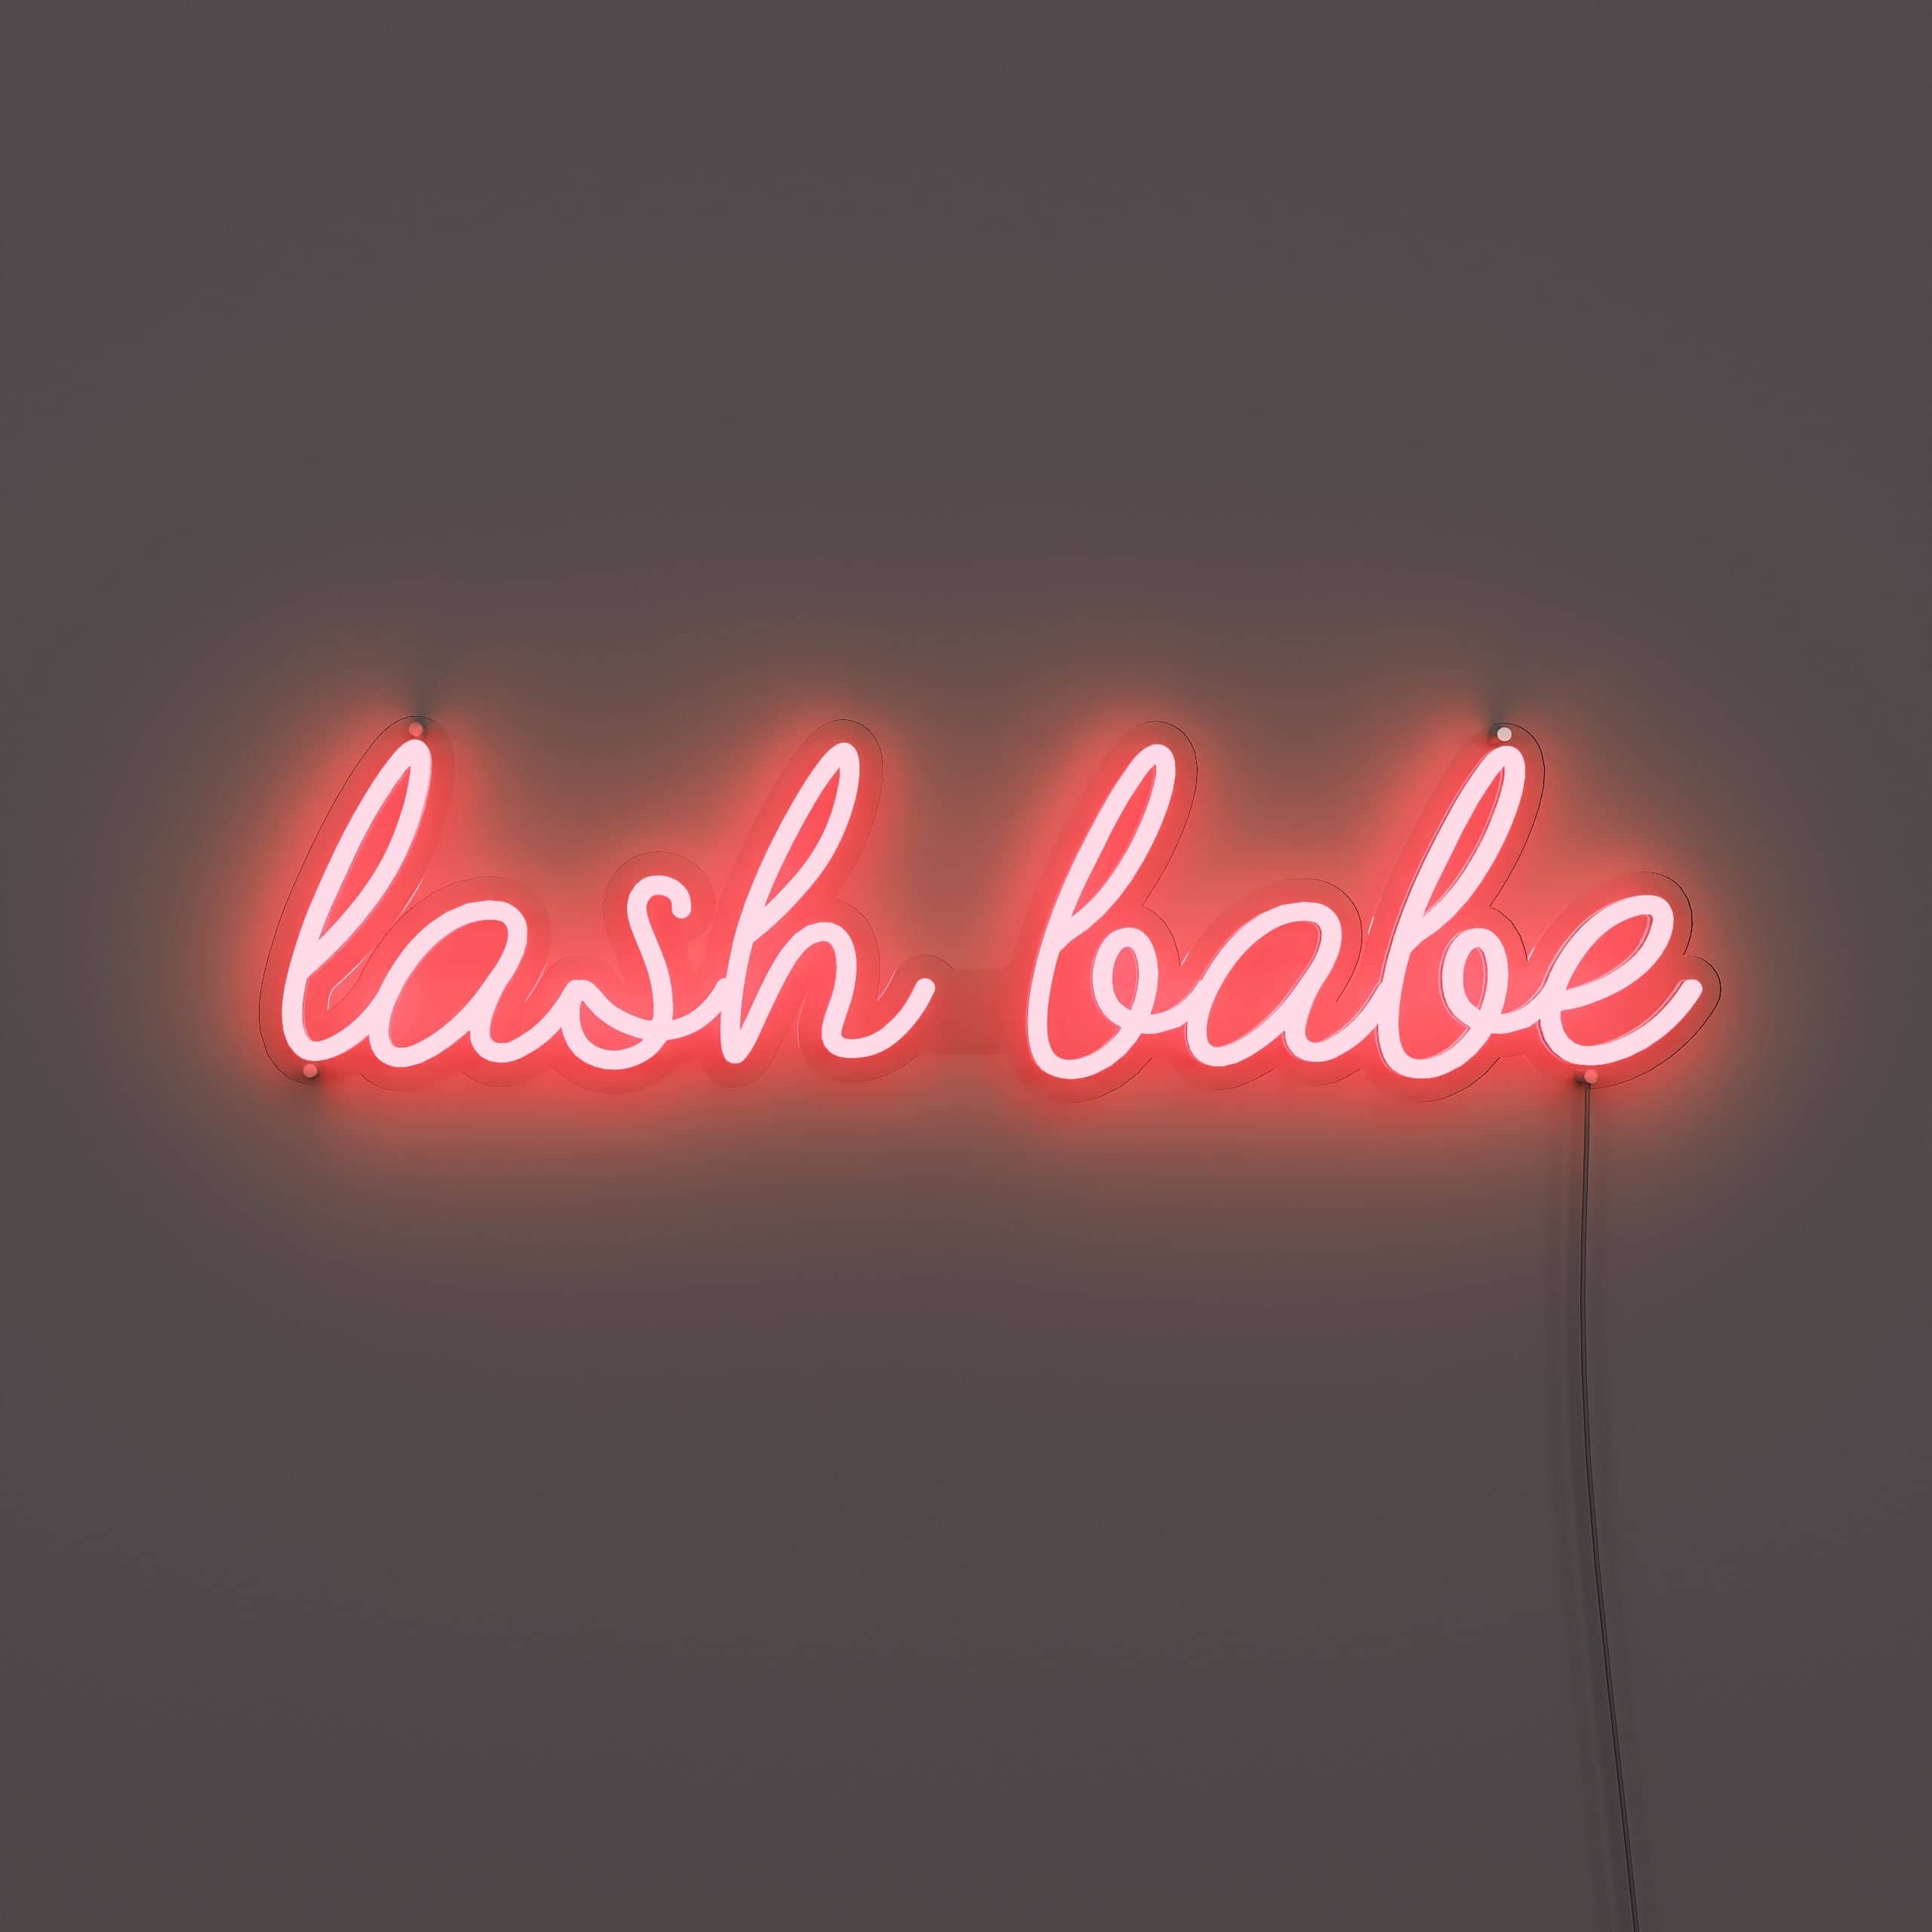 achieve-captivating-lashes-effortlessly!-neon-sign-lite